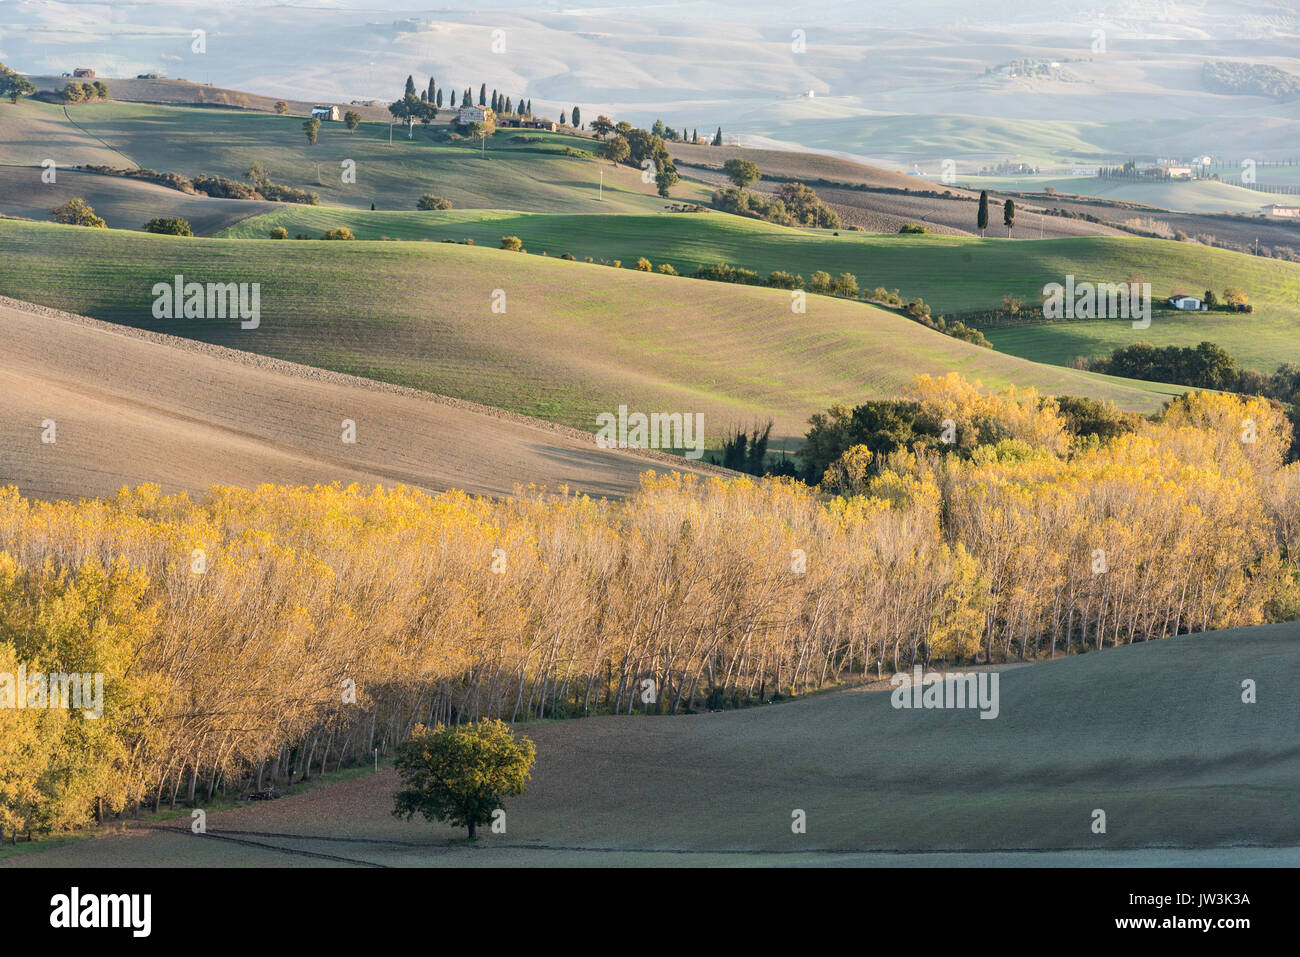 Italy, Tuscany, San Quirico D'orcia, Hills of cultivated land and autumn yellow forests illuminated by setting sun Stock Photo